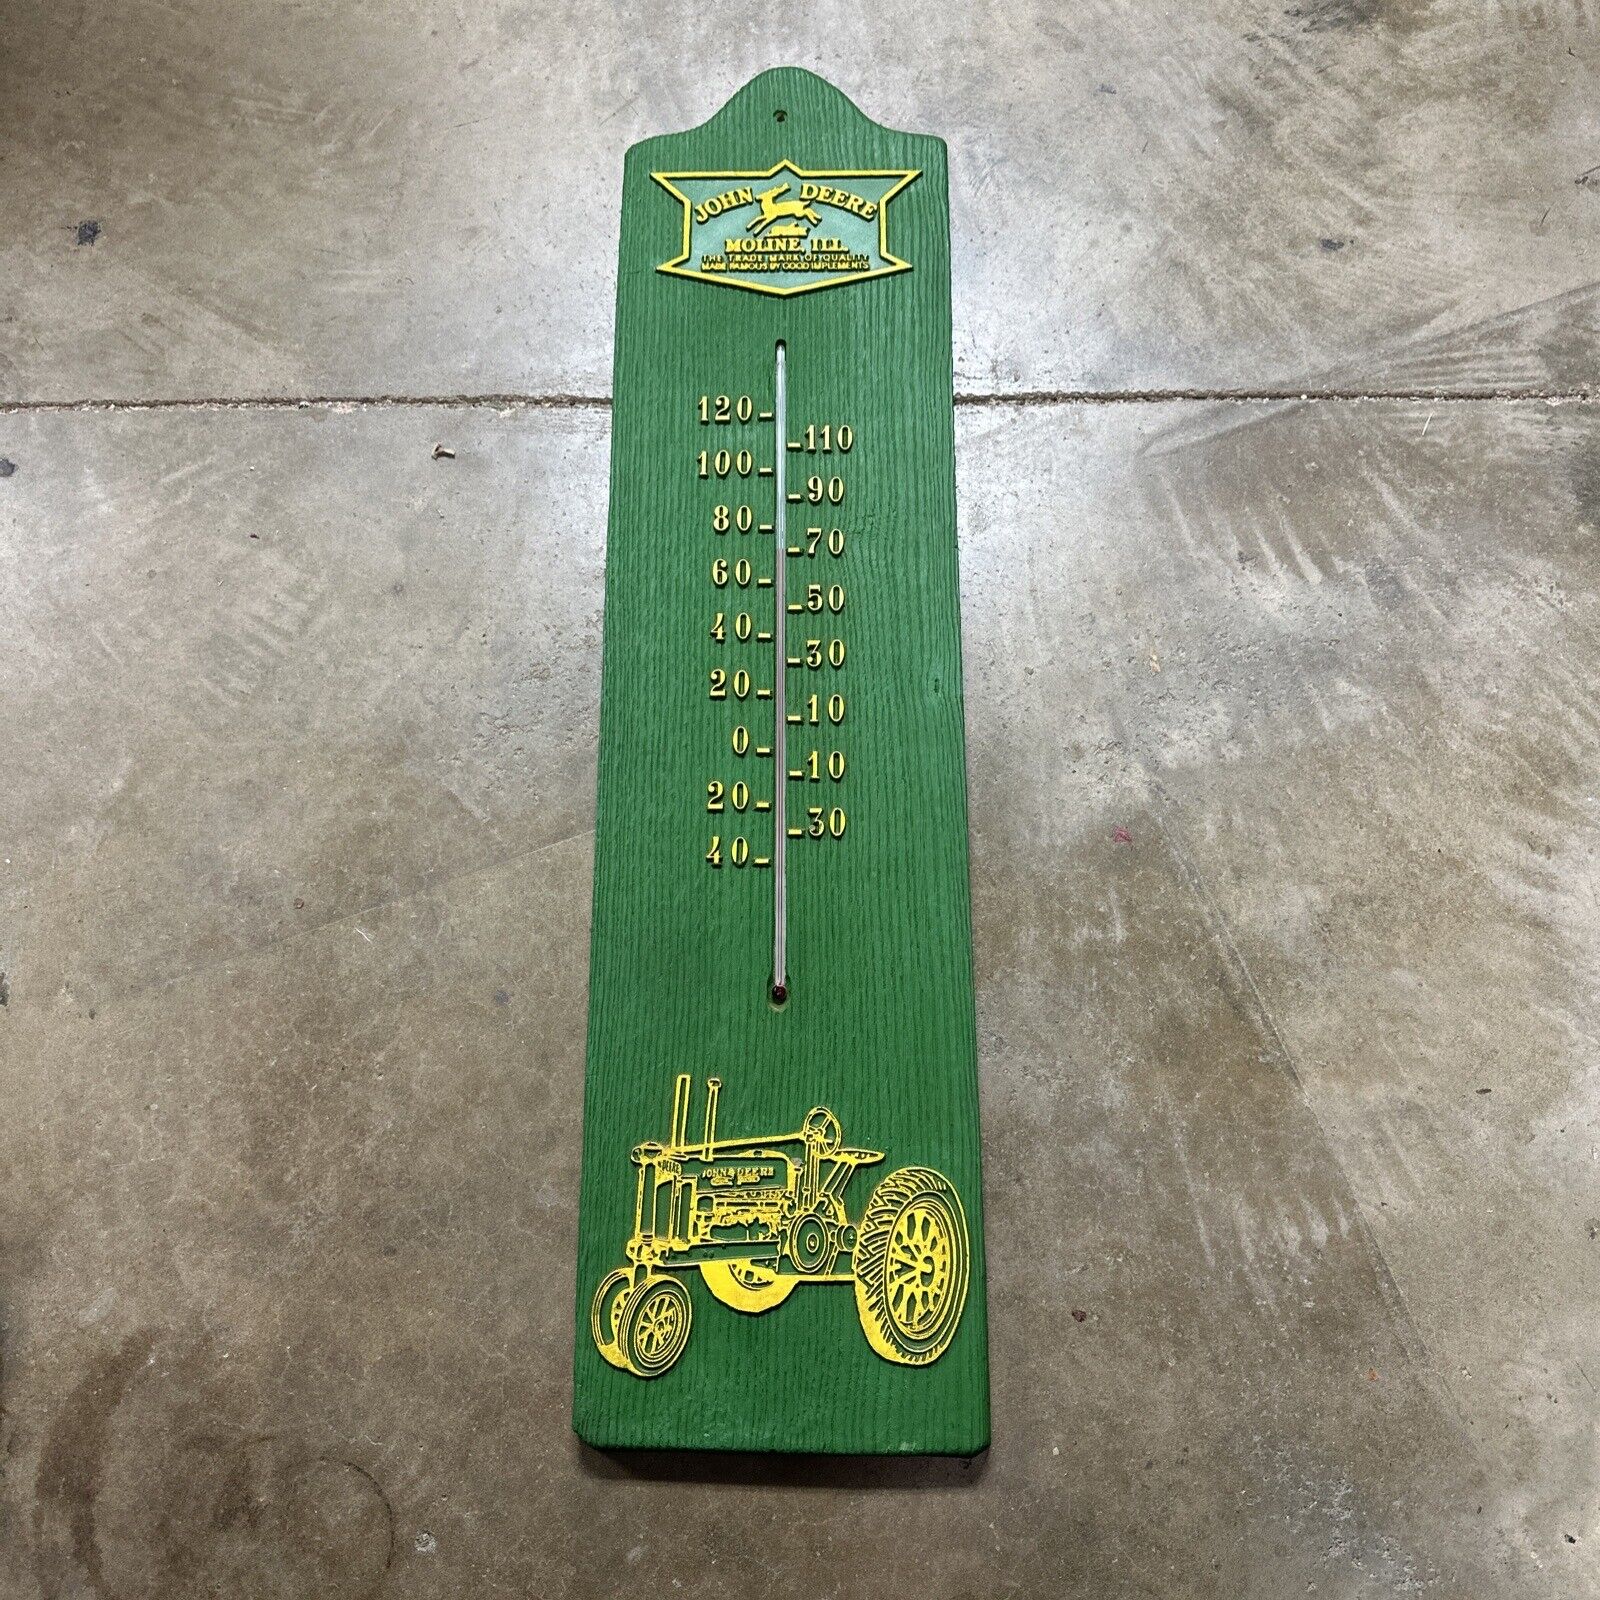 RARE Large 29” JOHN DEERE  THERMOMETER Faux Wood Green & Yellow Works Excellent